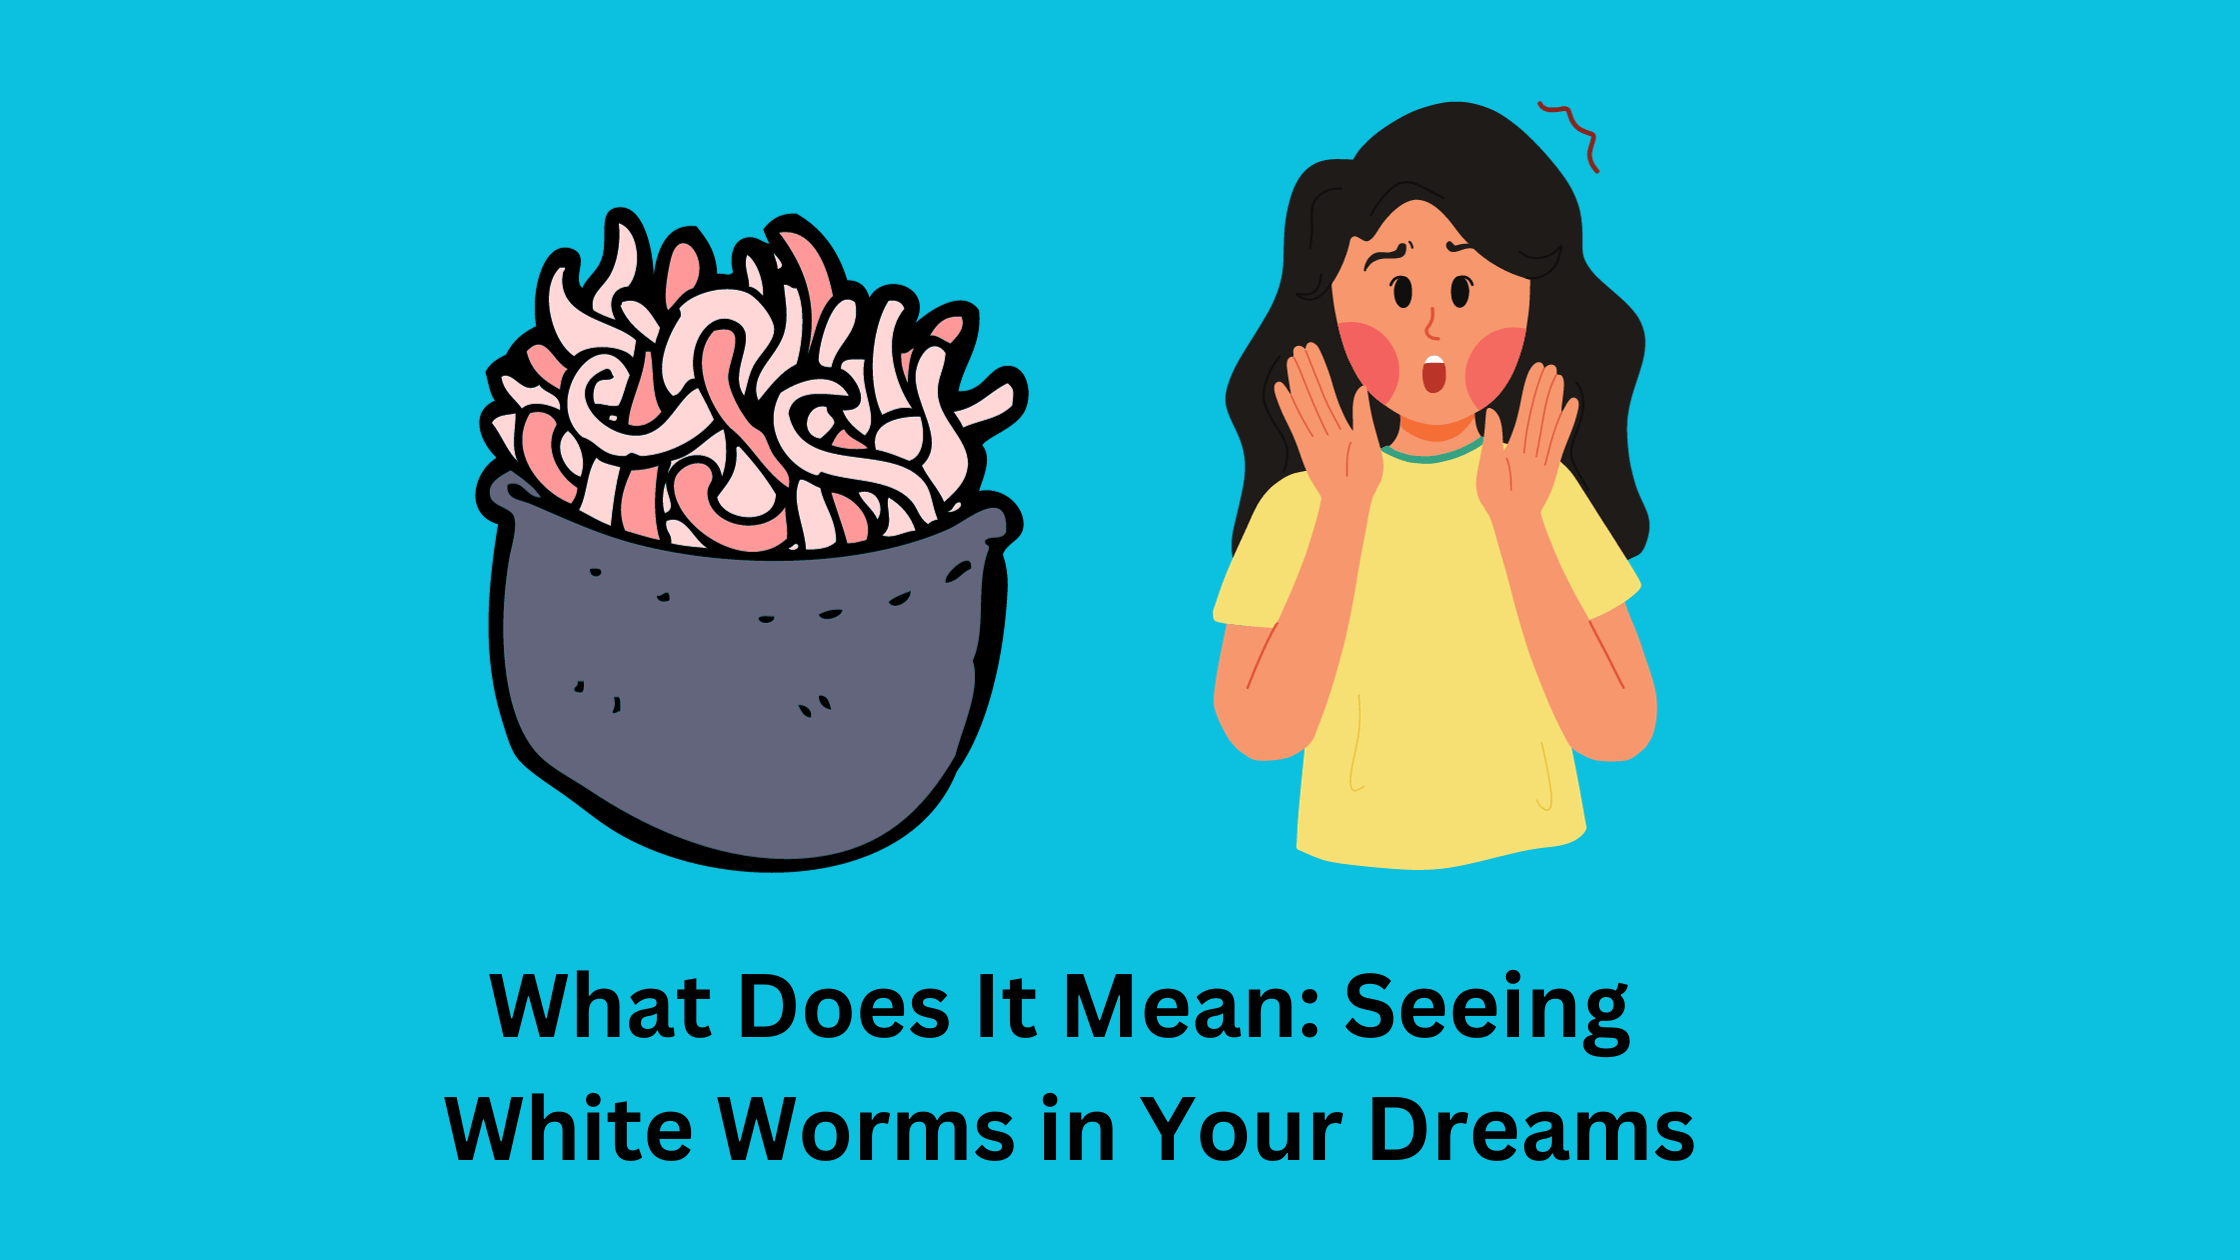 Seeing White Worms in Your Dreams